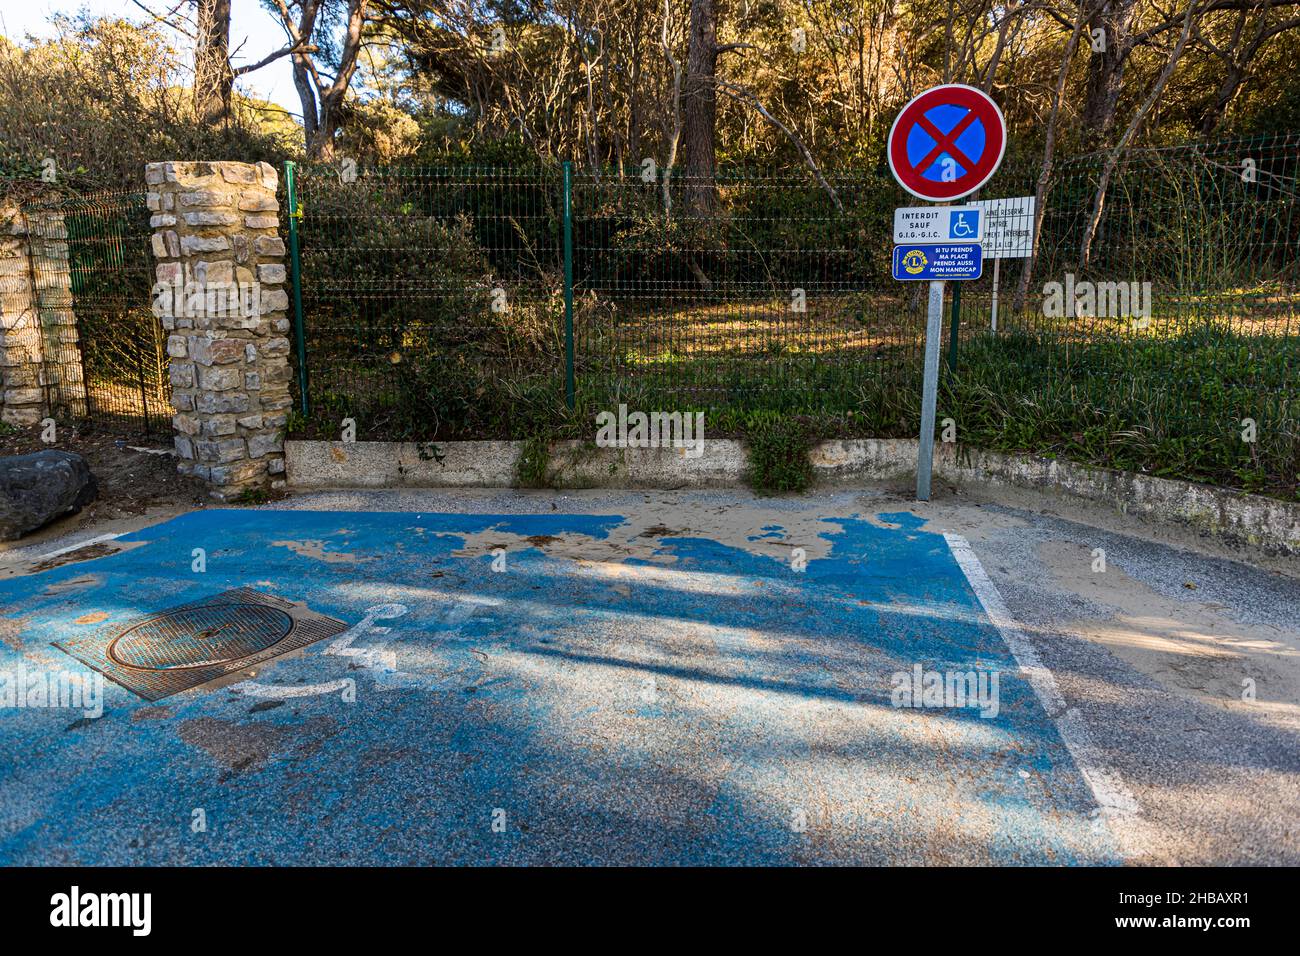 Parking space reserved for disabled people. A sign put up by the Lions Club says: If you take my place, take my disability too. Bormes-les-Mimosas, France Stock Photo